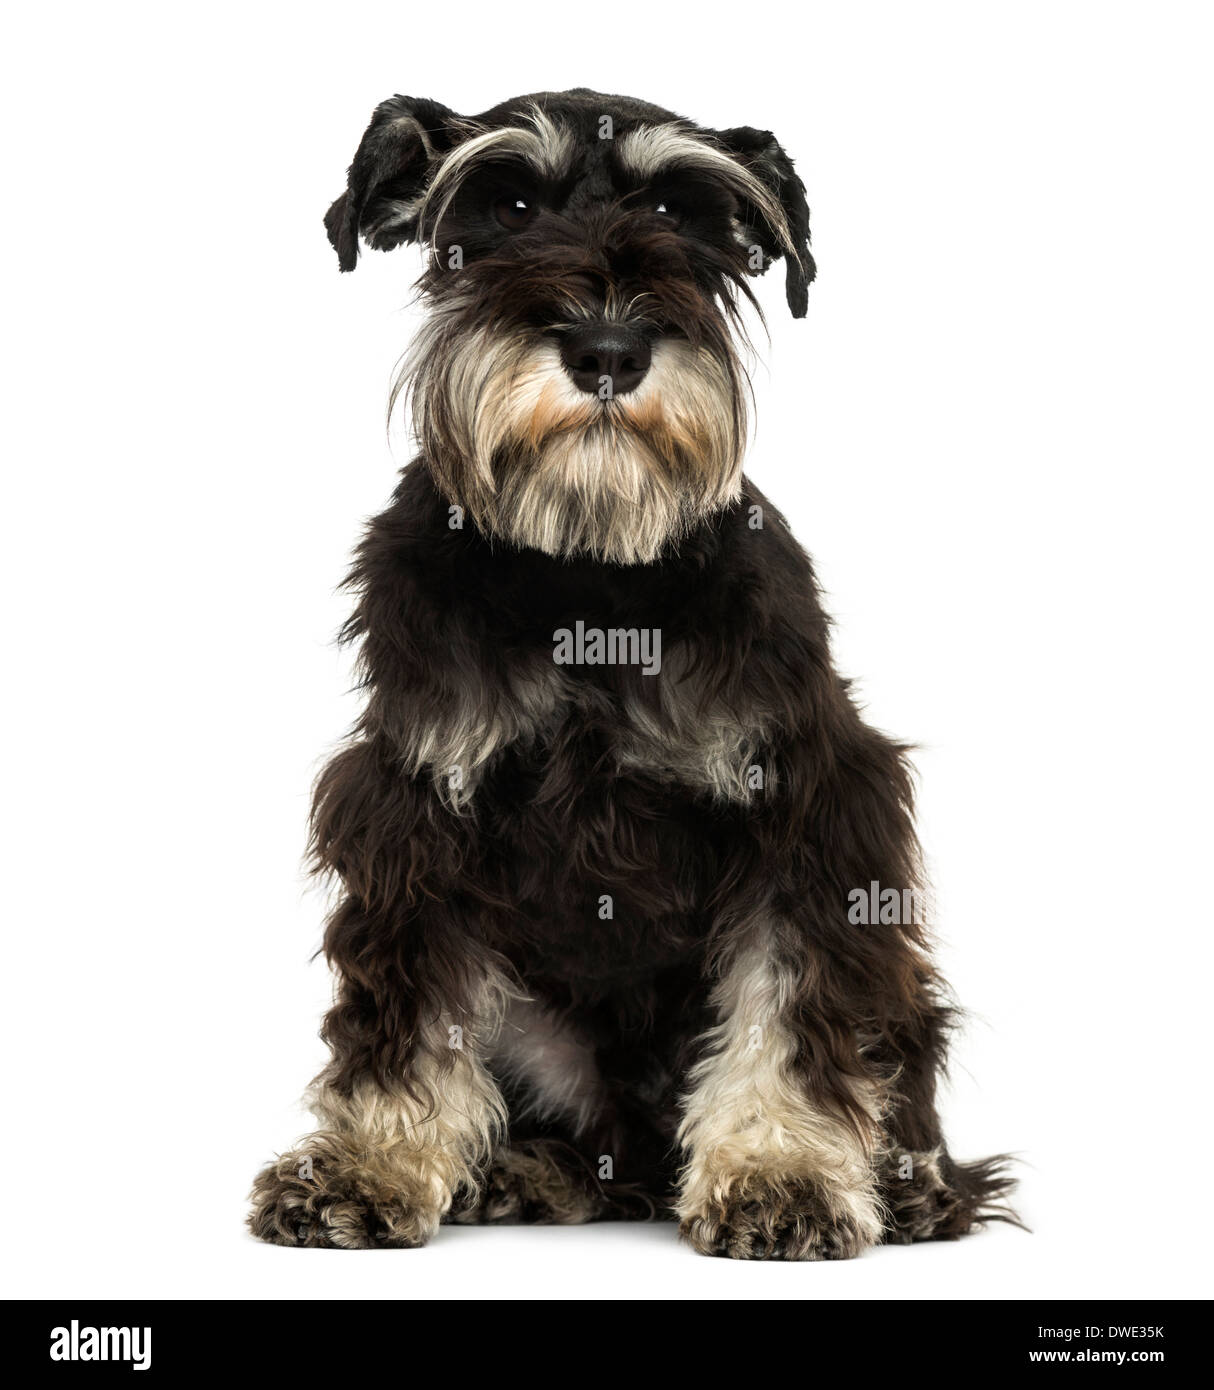 Front view of a Miniature Schnauzer sitting, looking at the camera, 1 year old, against white background Stock Photo